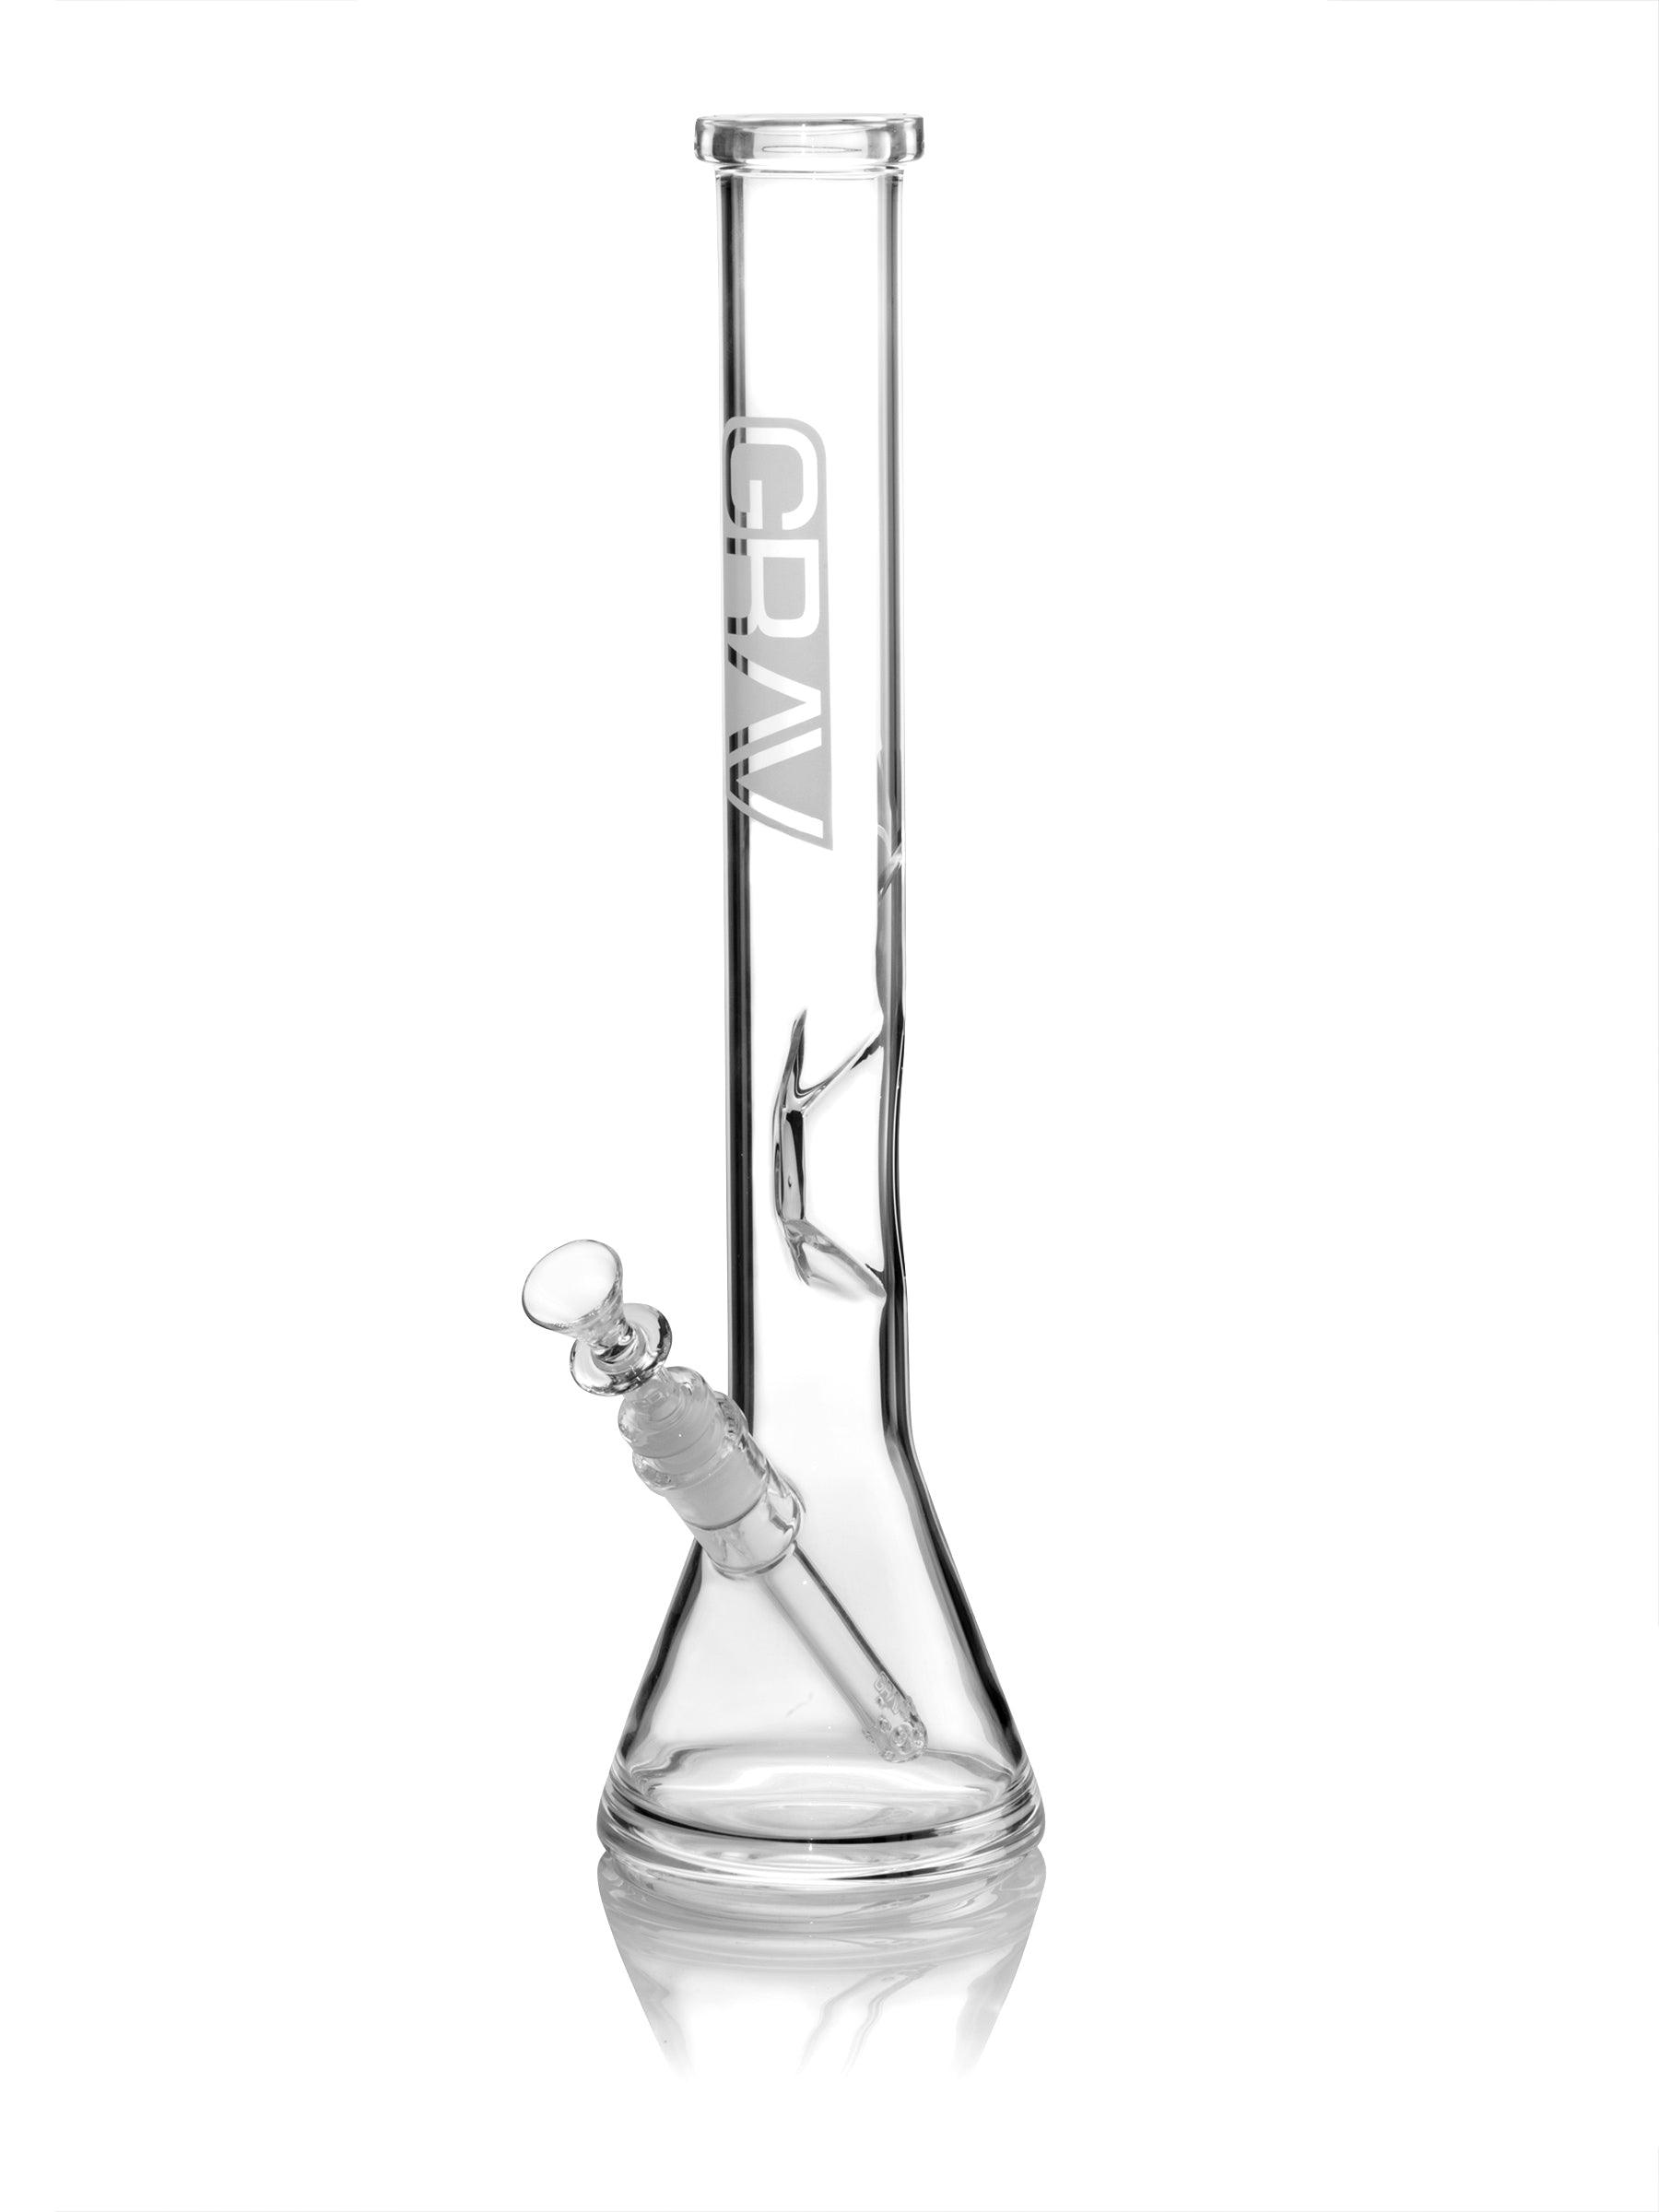 Straight Neck Heavy 16 In USA Glass Bong Ice Catcher - Clear